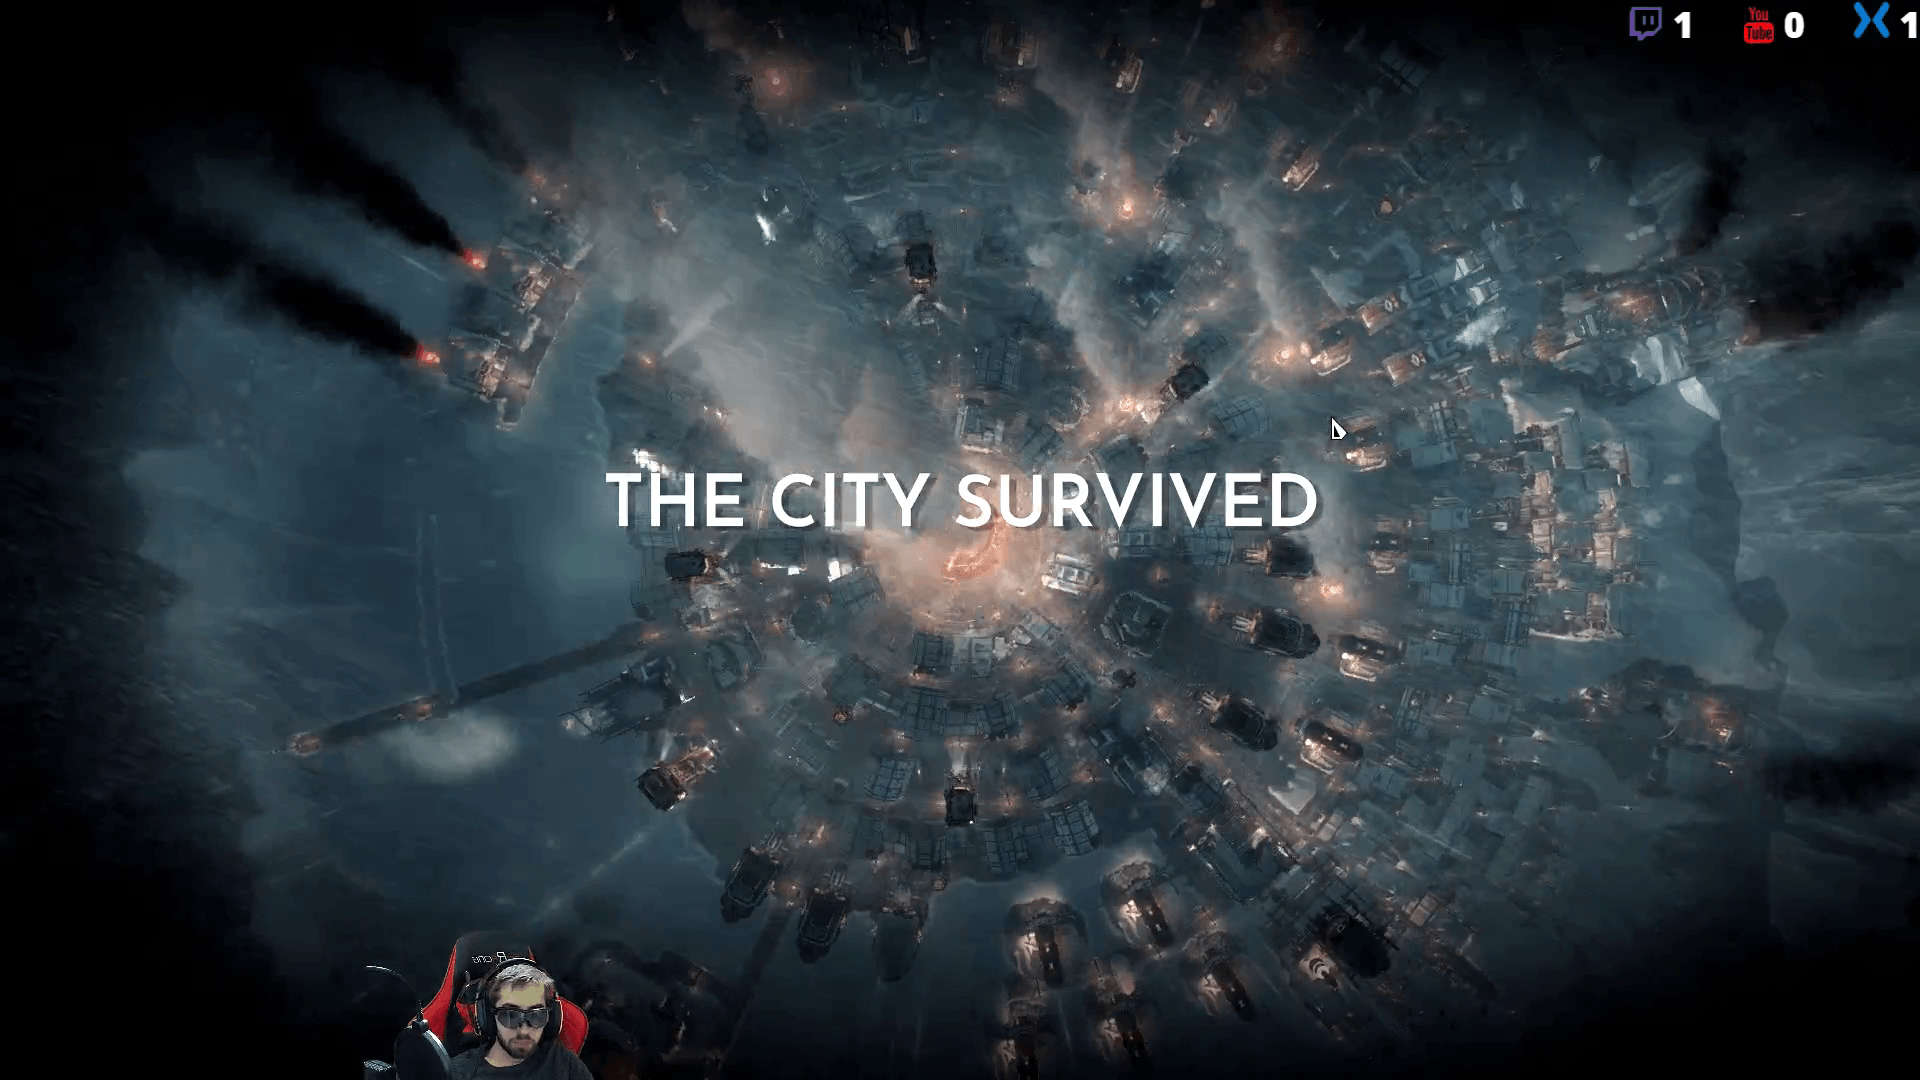 The City Survived #Frostpunk